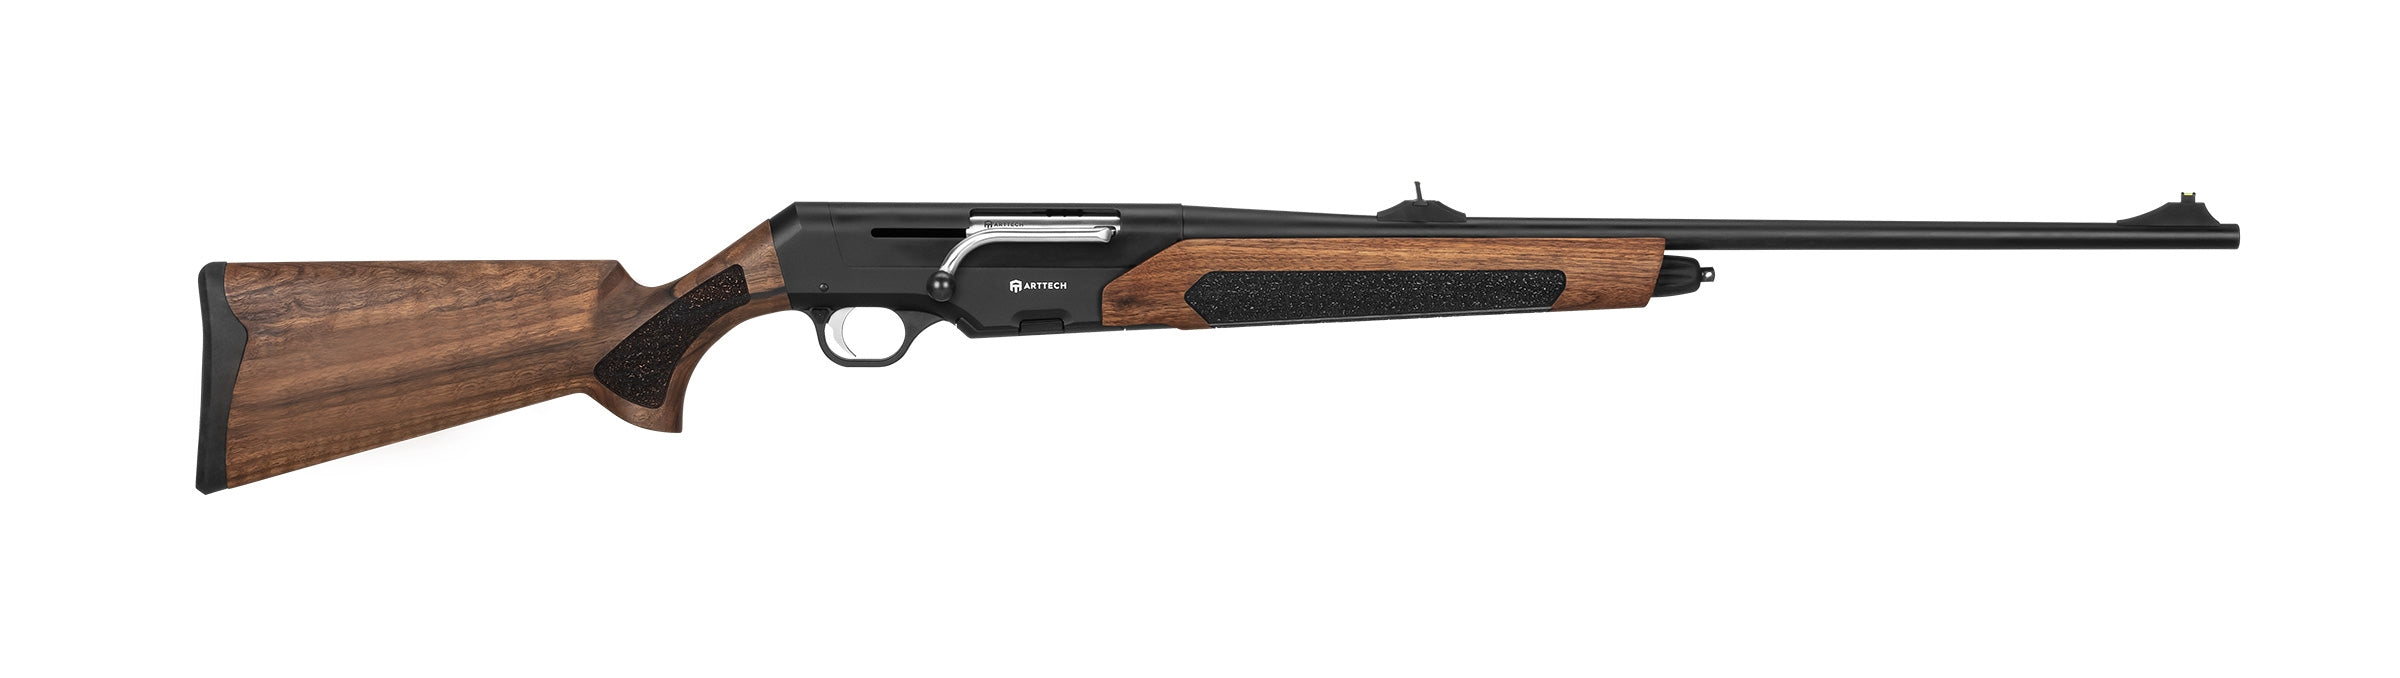 Prima SP Rectilinear Hunting Rifle